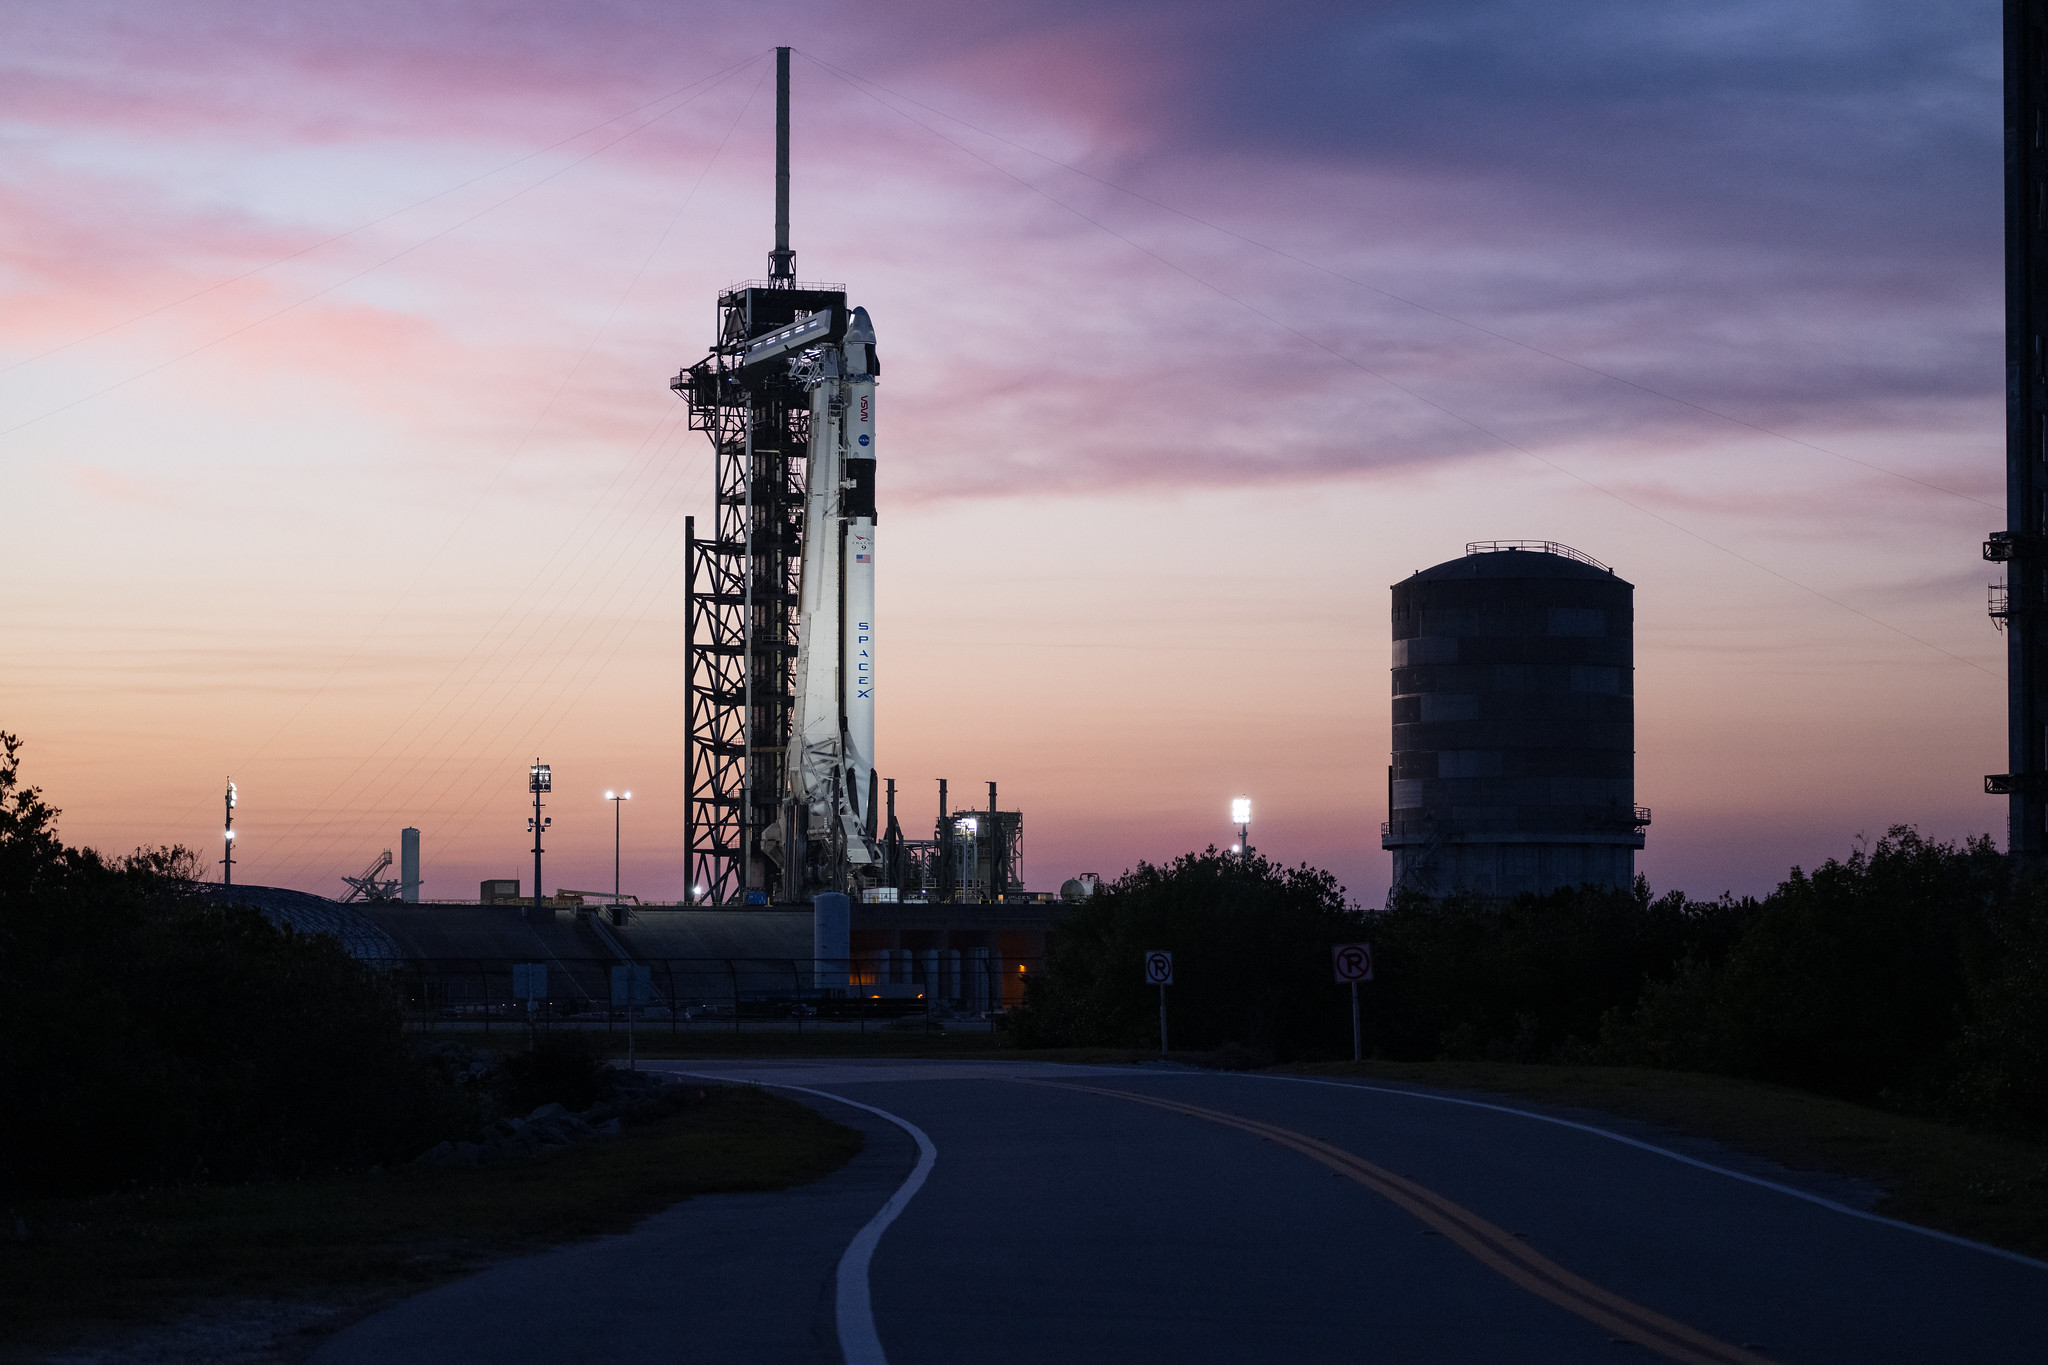 A SpaceX Falcon 9 rocket with the company's Dragon spacecraft on top is seen during sunset on the launch pad at Launch Complex 39A as preparations continue for the Crew-8 mission, Tuesday, Feb. 27, 2024, at NASA’s Kennedy Space Center in Florida.